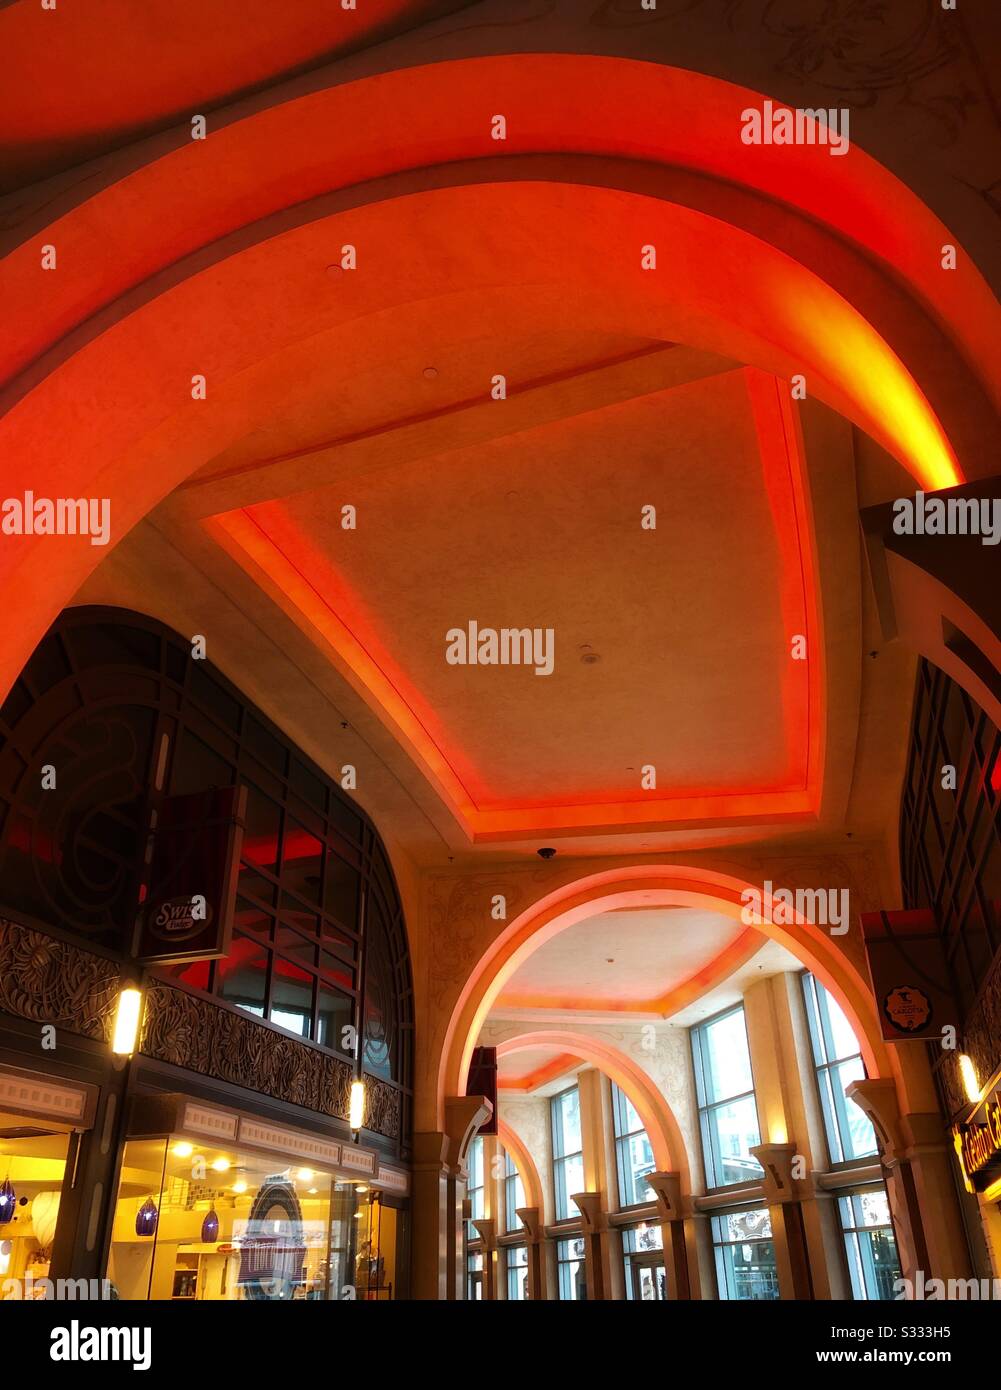 Arched walkway illuminated in red. Stock Photo